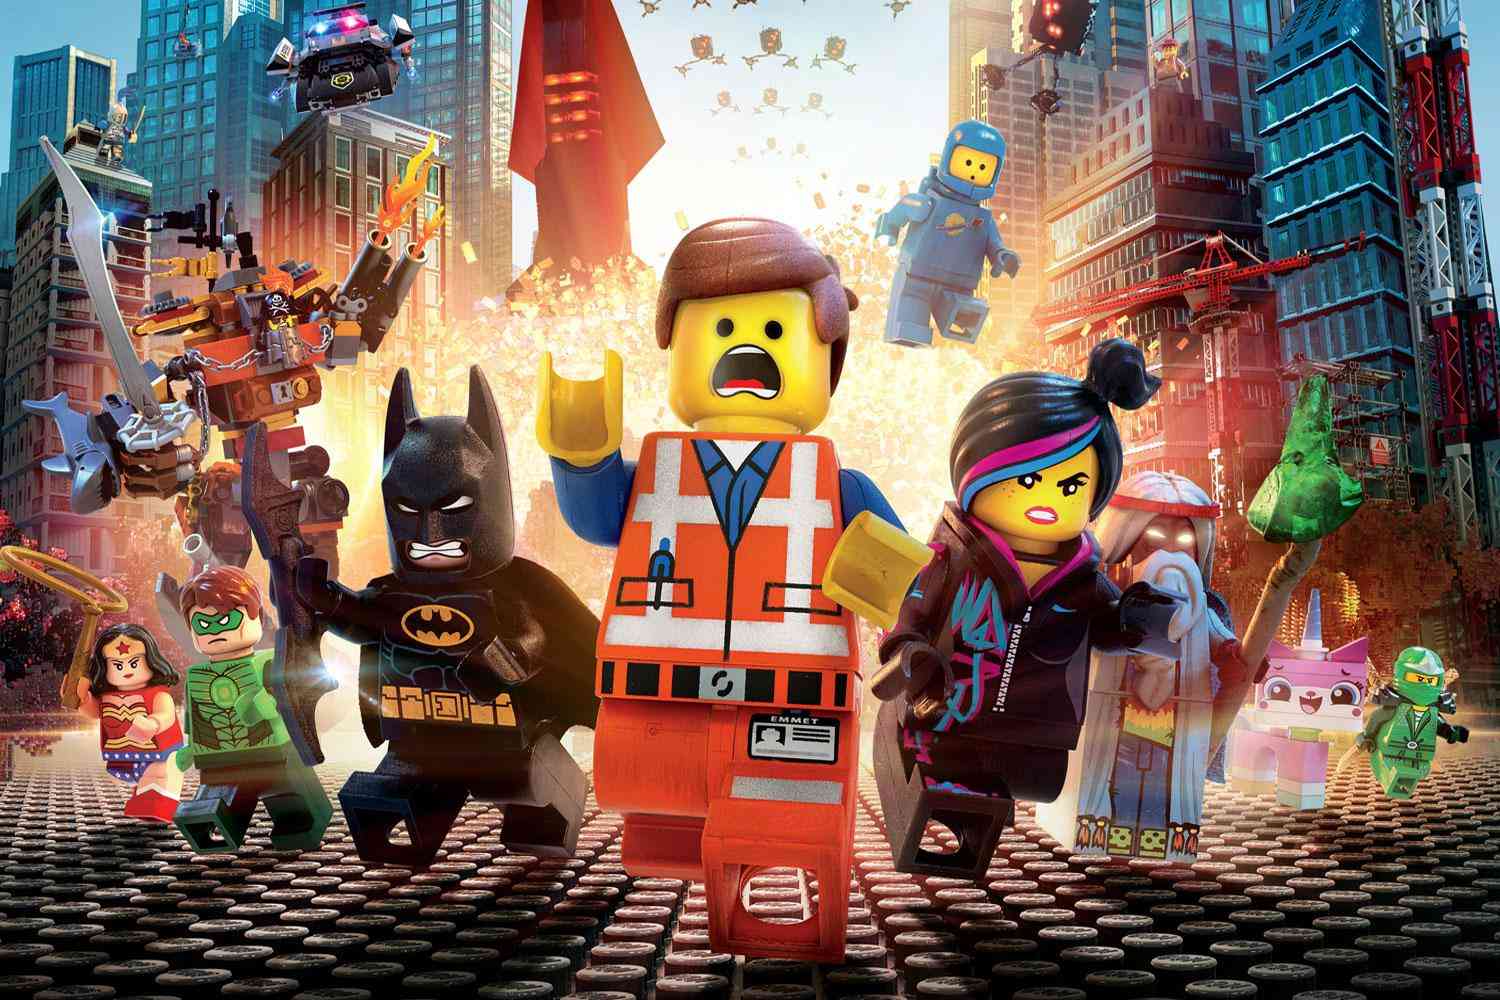  Play The Lego Movie Game Free Today! Download and Play the Game Now! It's what Batman would want you to do! Yours Right Now For: $0.00 (OR Pay $